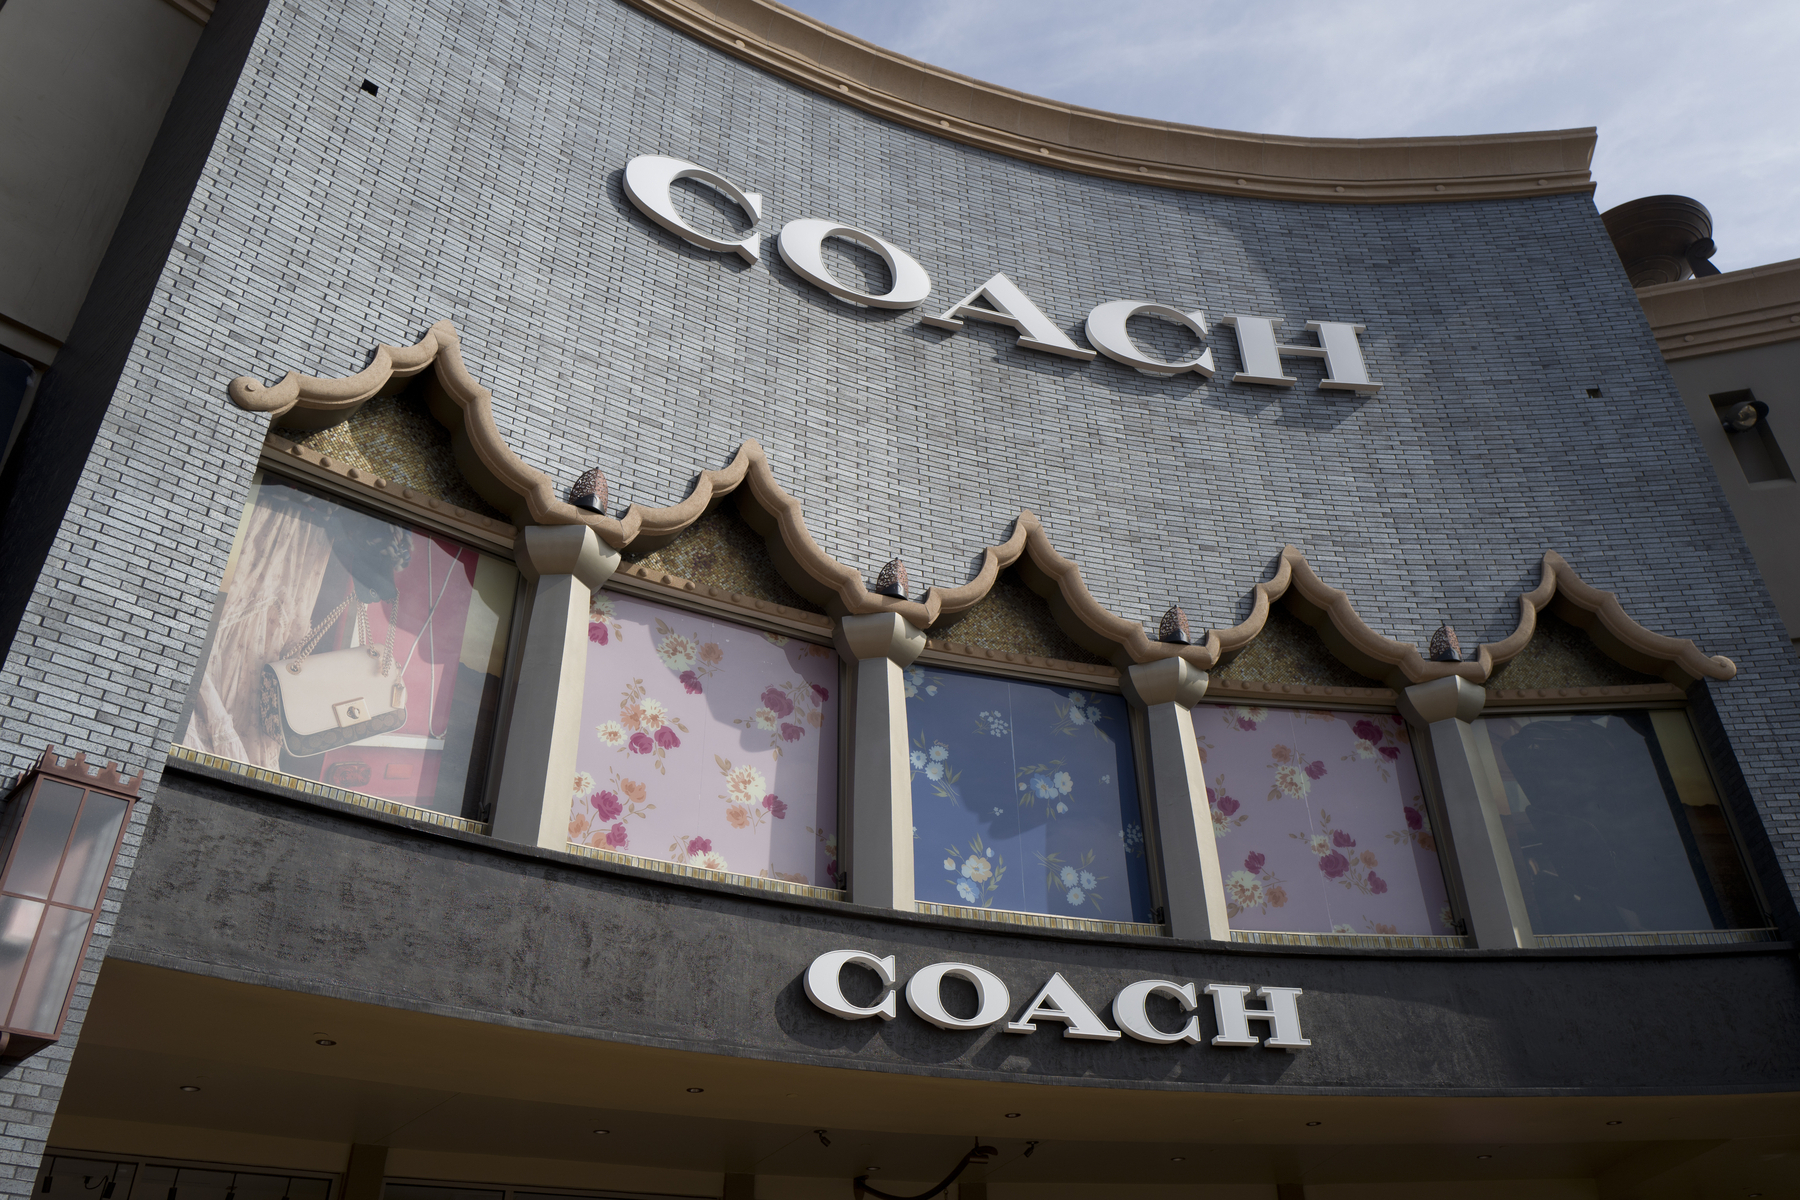 Owners of luxury brand Coach, Tapestry, purchase parent company of Michael  Kors, Jimmy Choo and Versace in US$8.5 billion deal, News